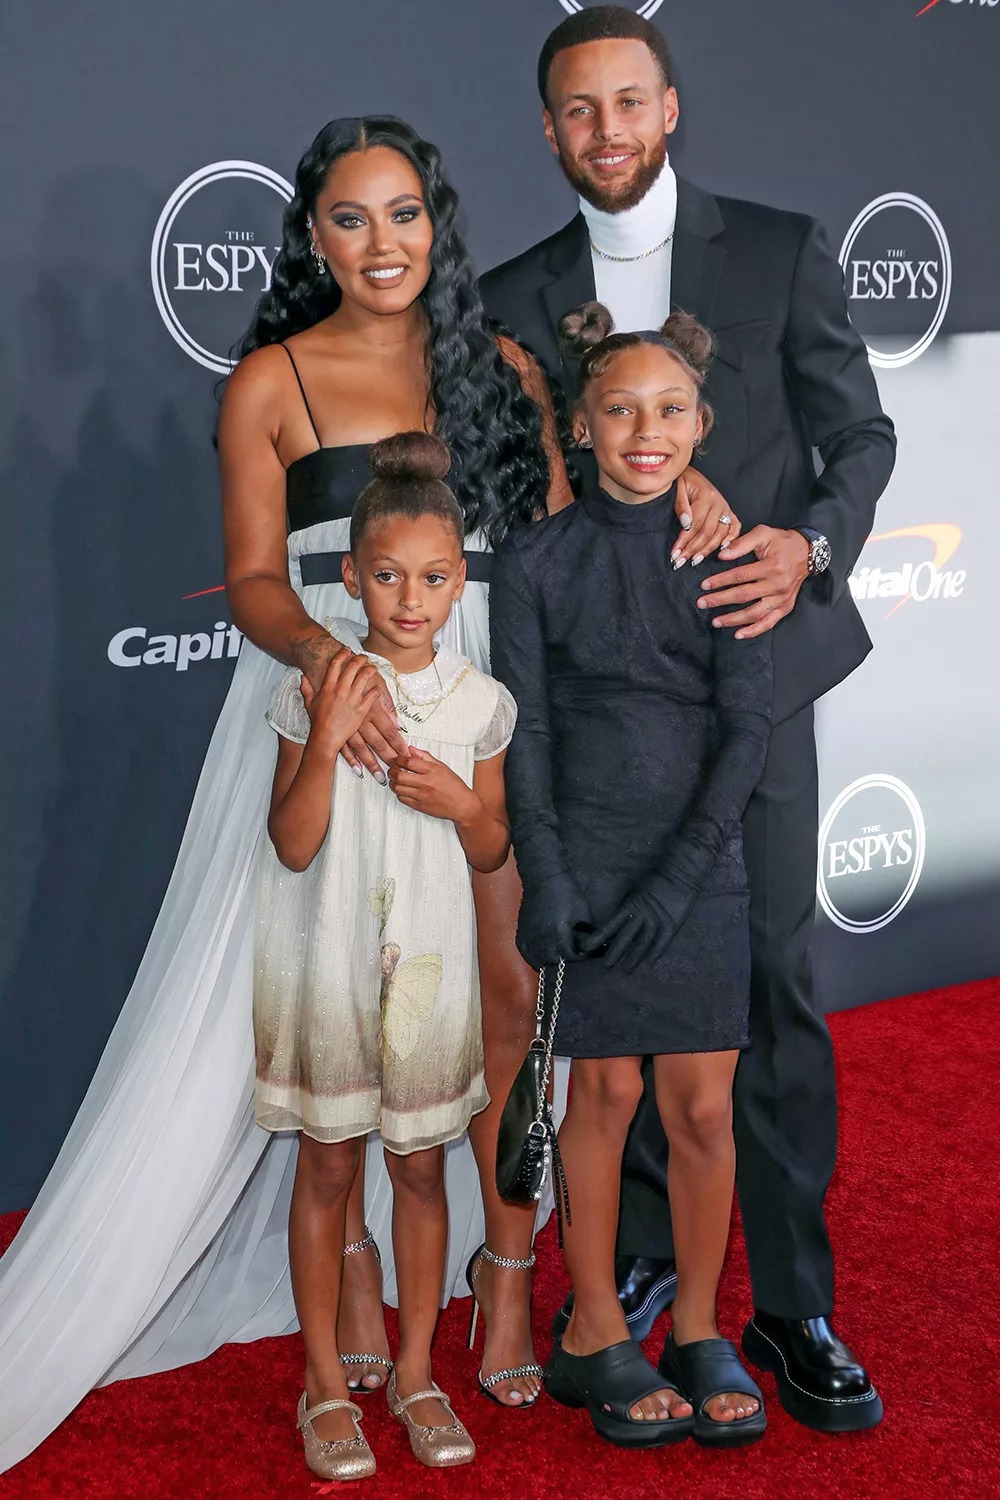 likhoa little known things about the family stephen curry and ayesha have always been the hottest couple in the basketball world over the past years 6551f790cc794 Little Known Things About The Family Stephen Curry And Ayesha Have Always Been The Hottest Couple In The Basketball World Over The Past 20 Years